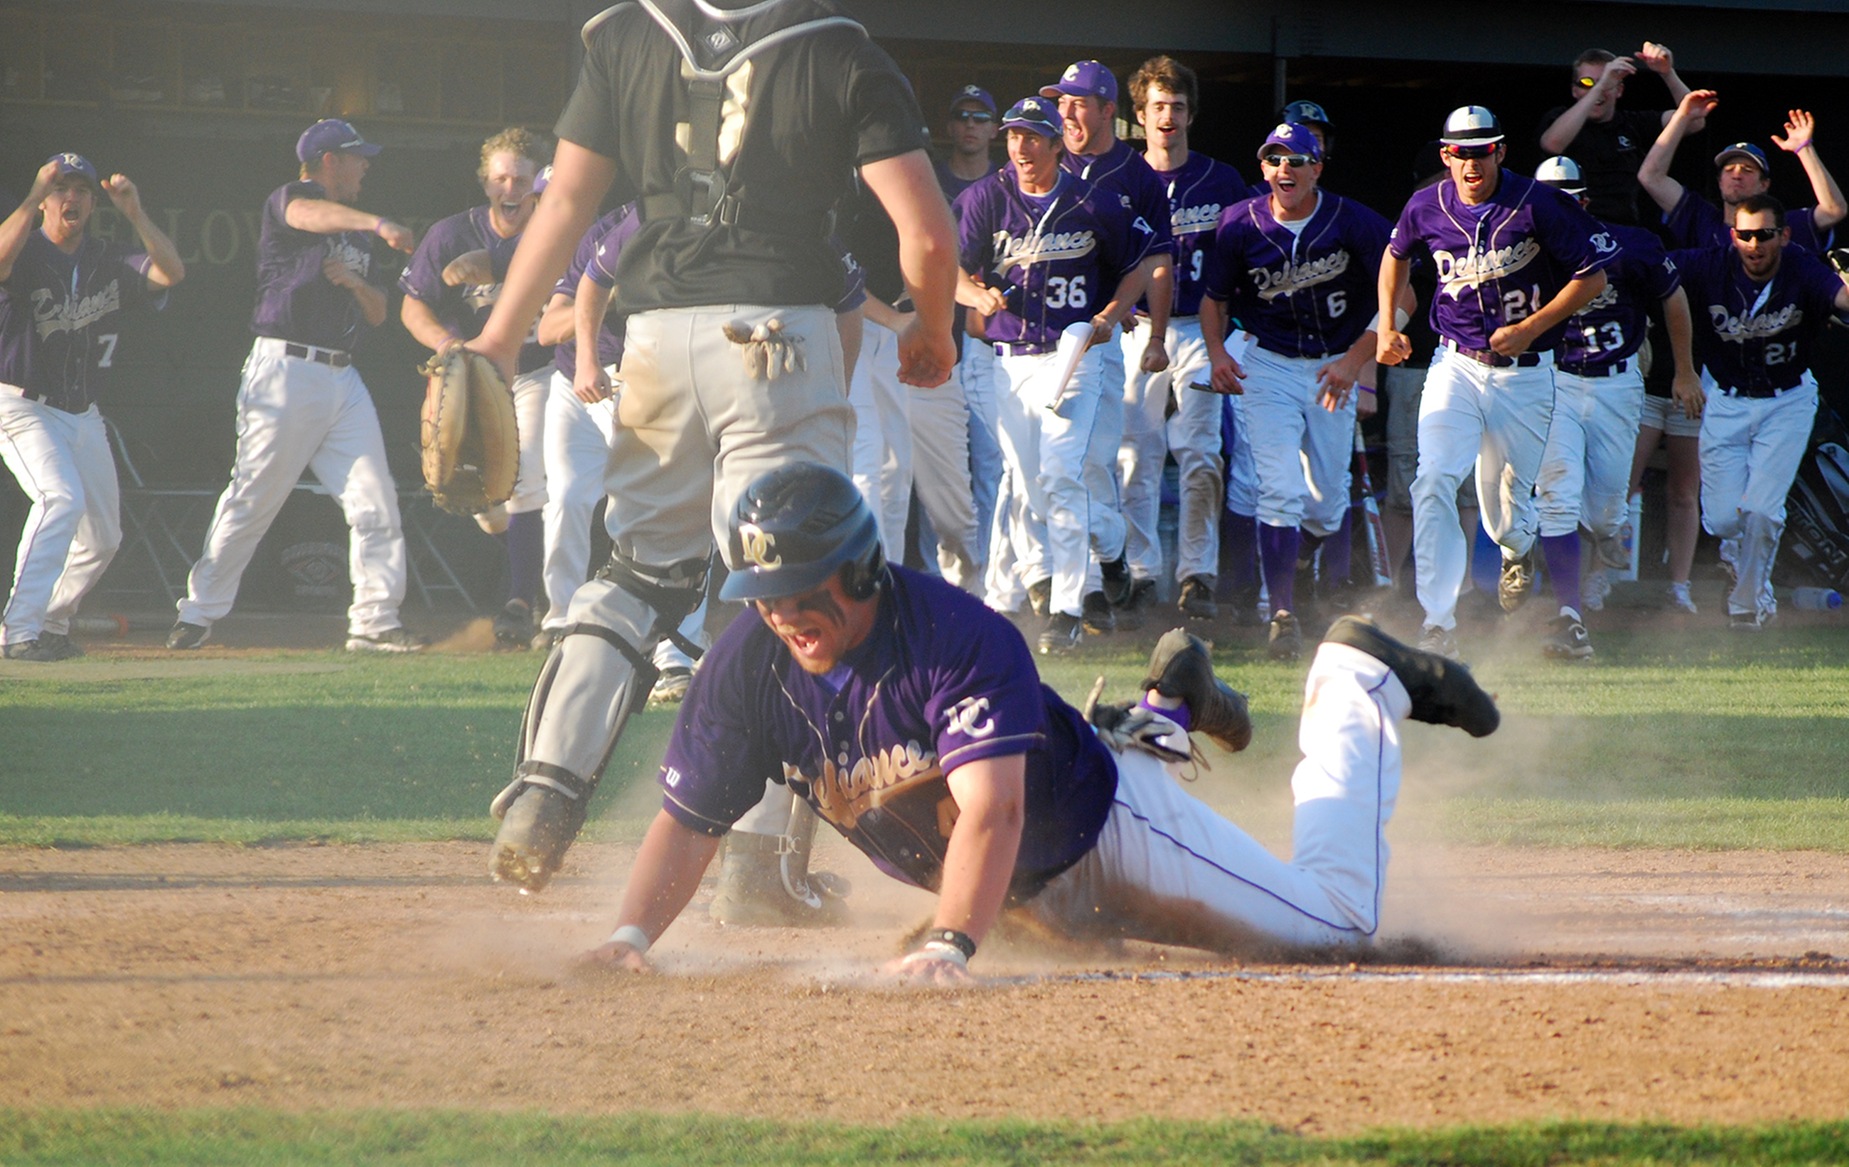 Defiance Rallies to Stun Manchester with Two-Run Ninth